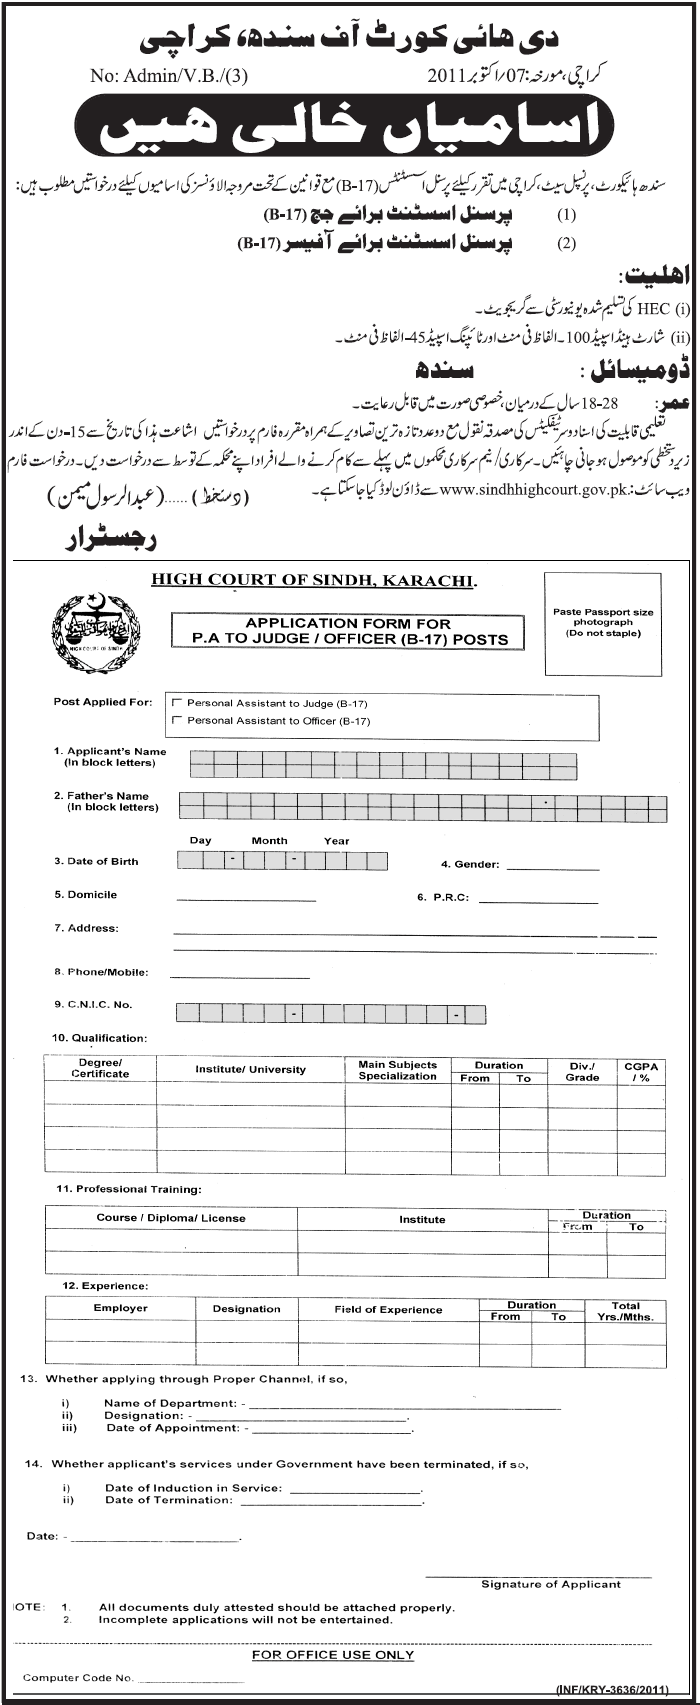 The High Court of Sindh Required Personal Assistants